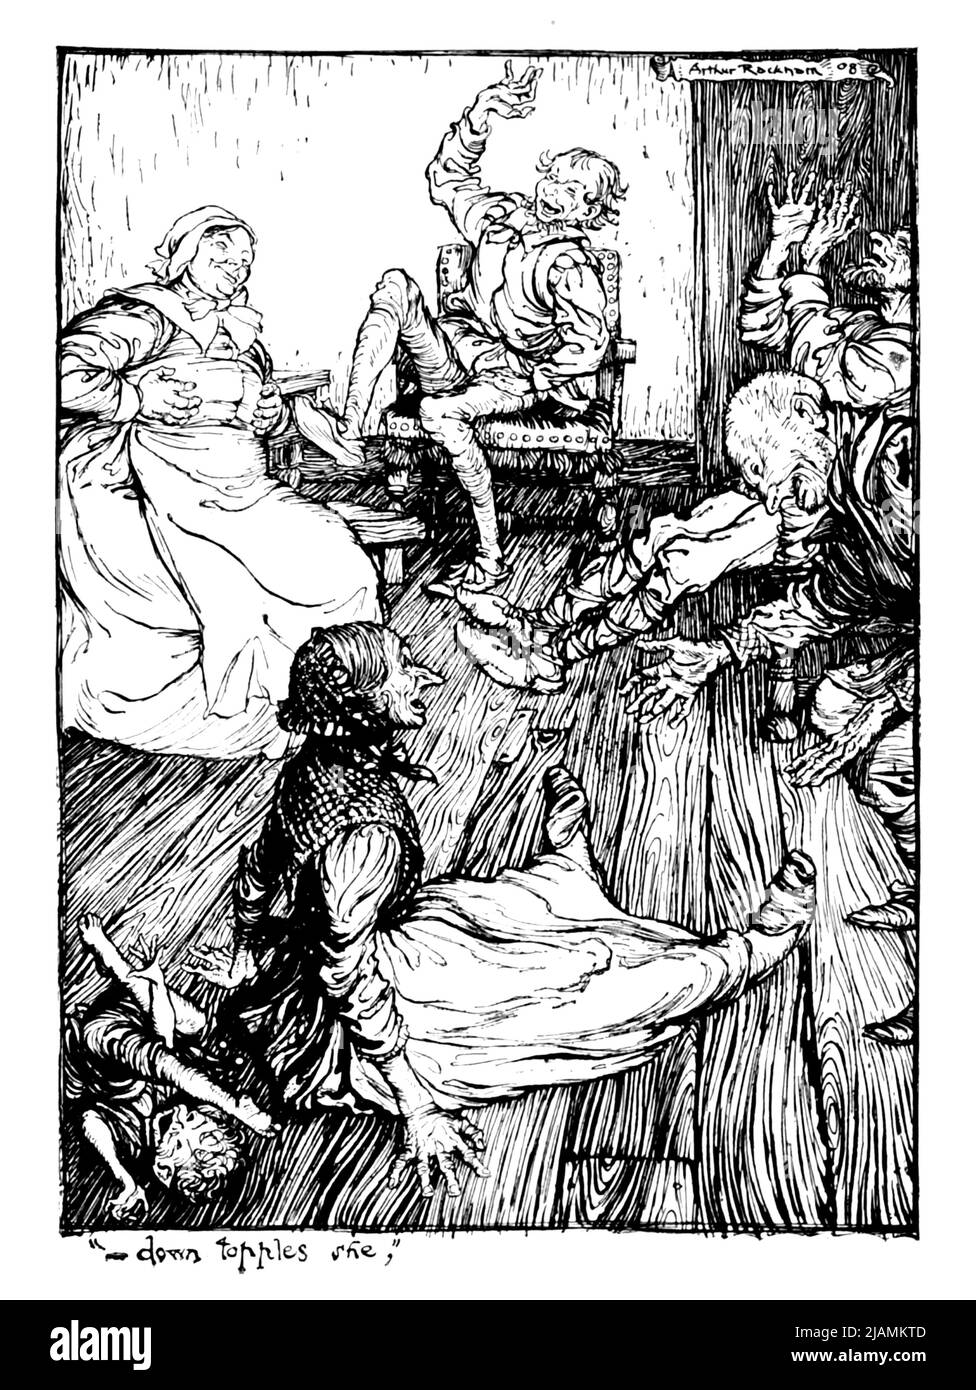 Down Topples She from ' A midsummer night's dream ' by William Shakespeare, 1564-1616; Illustrated by Arthur Rackham, 1867-1939 Publication date 1908 Publisher London, Heinemann; New York, Doubleday, Page & Co Stock Photo